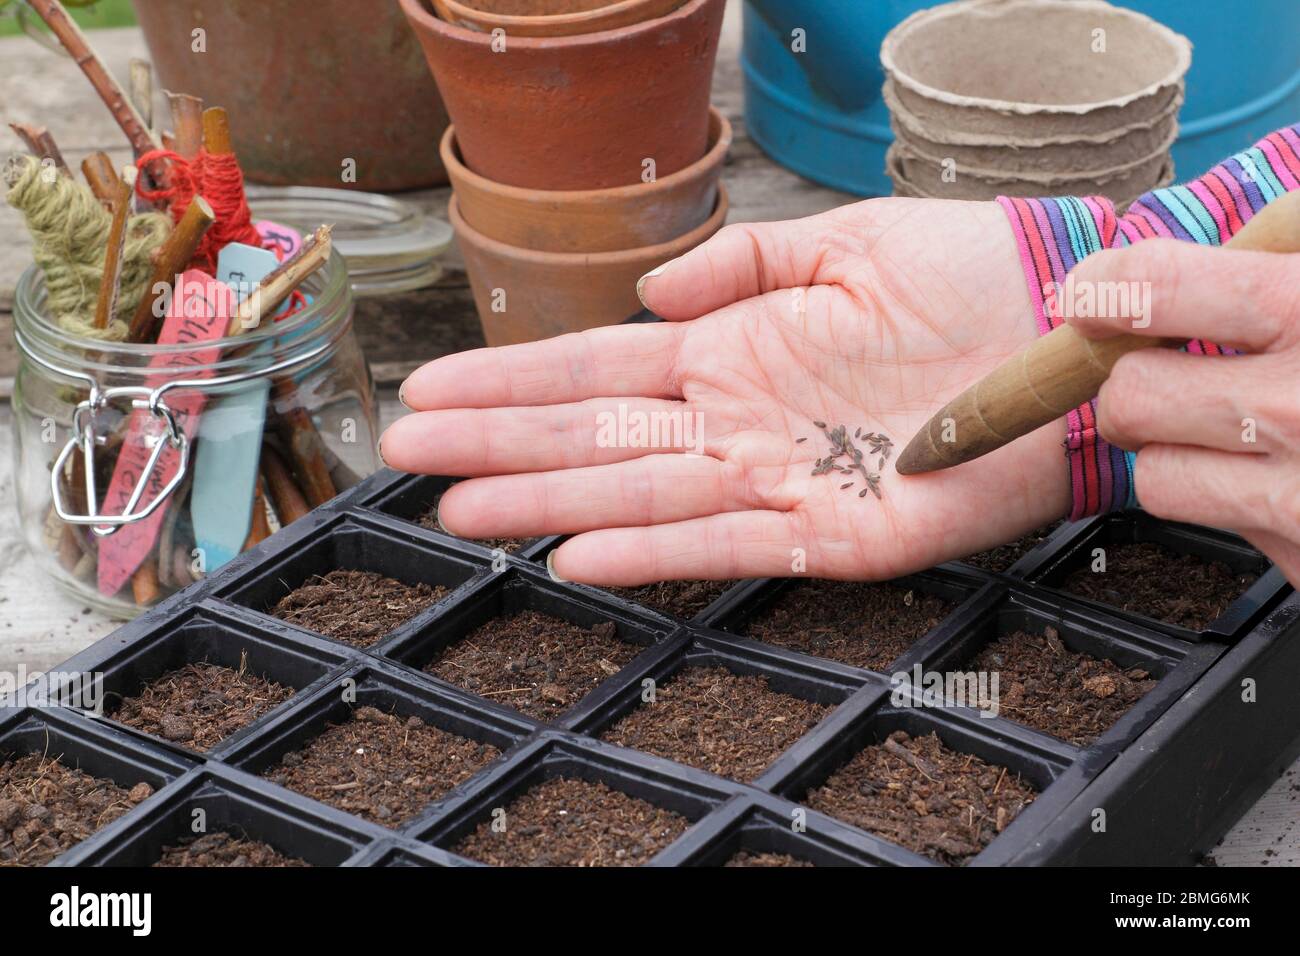 Sowing salad seed in a reused modular seed tray using a gardening dibber to aid seed spacing. UK Stock Photo